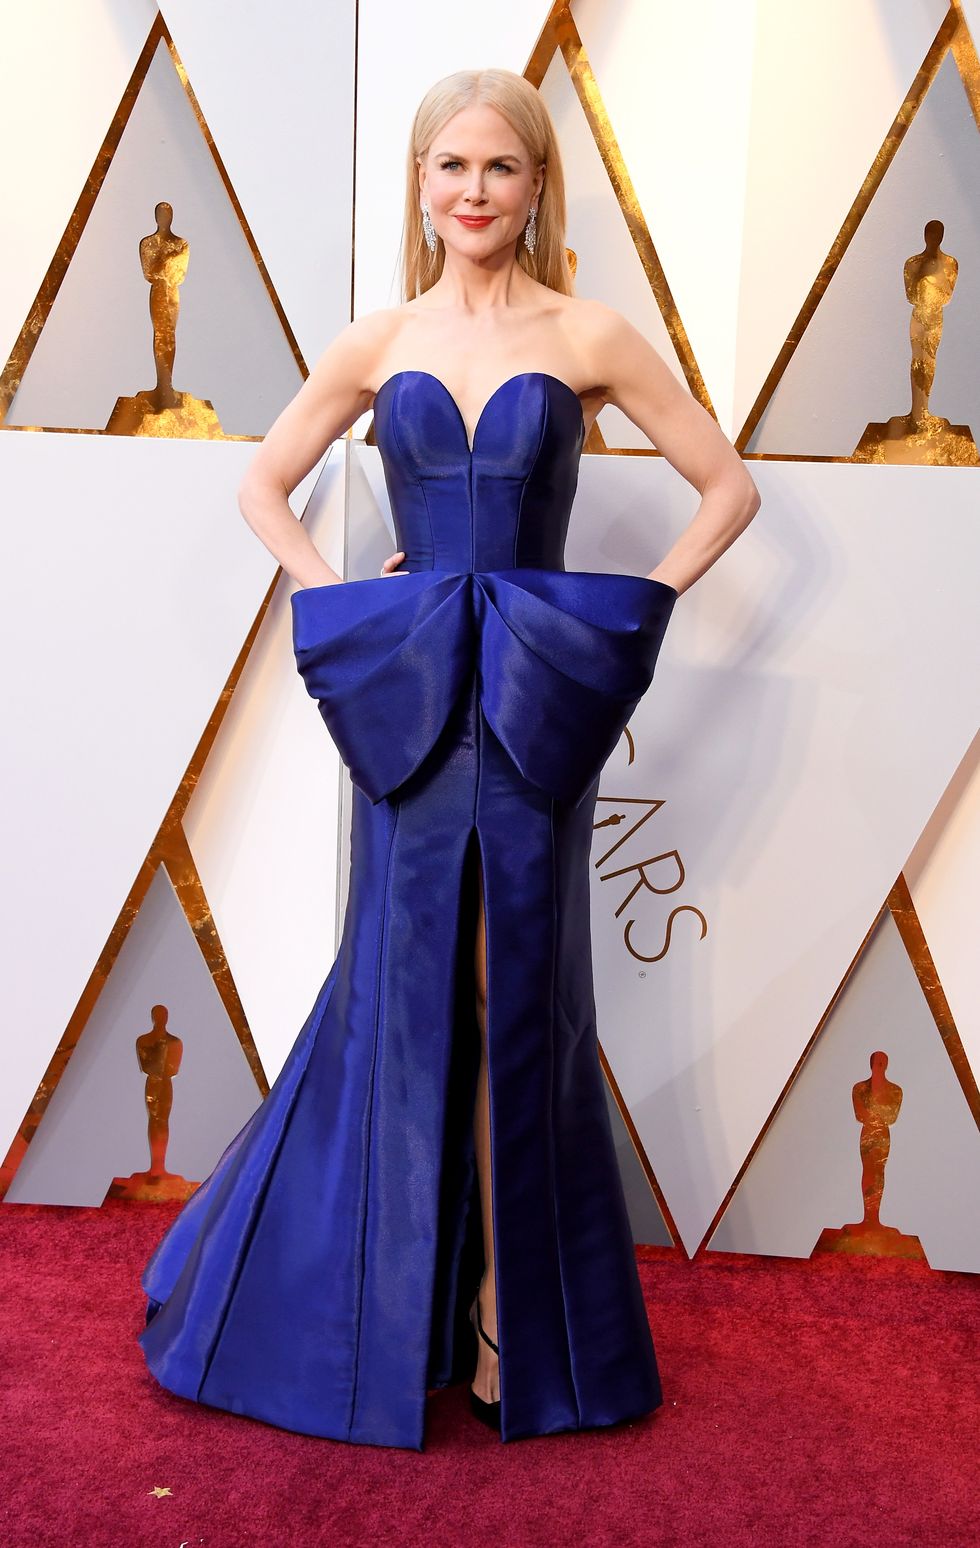 Oscars 2018: Best dressed red carpet celebrity looks pictured